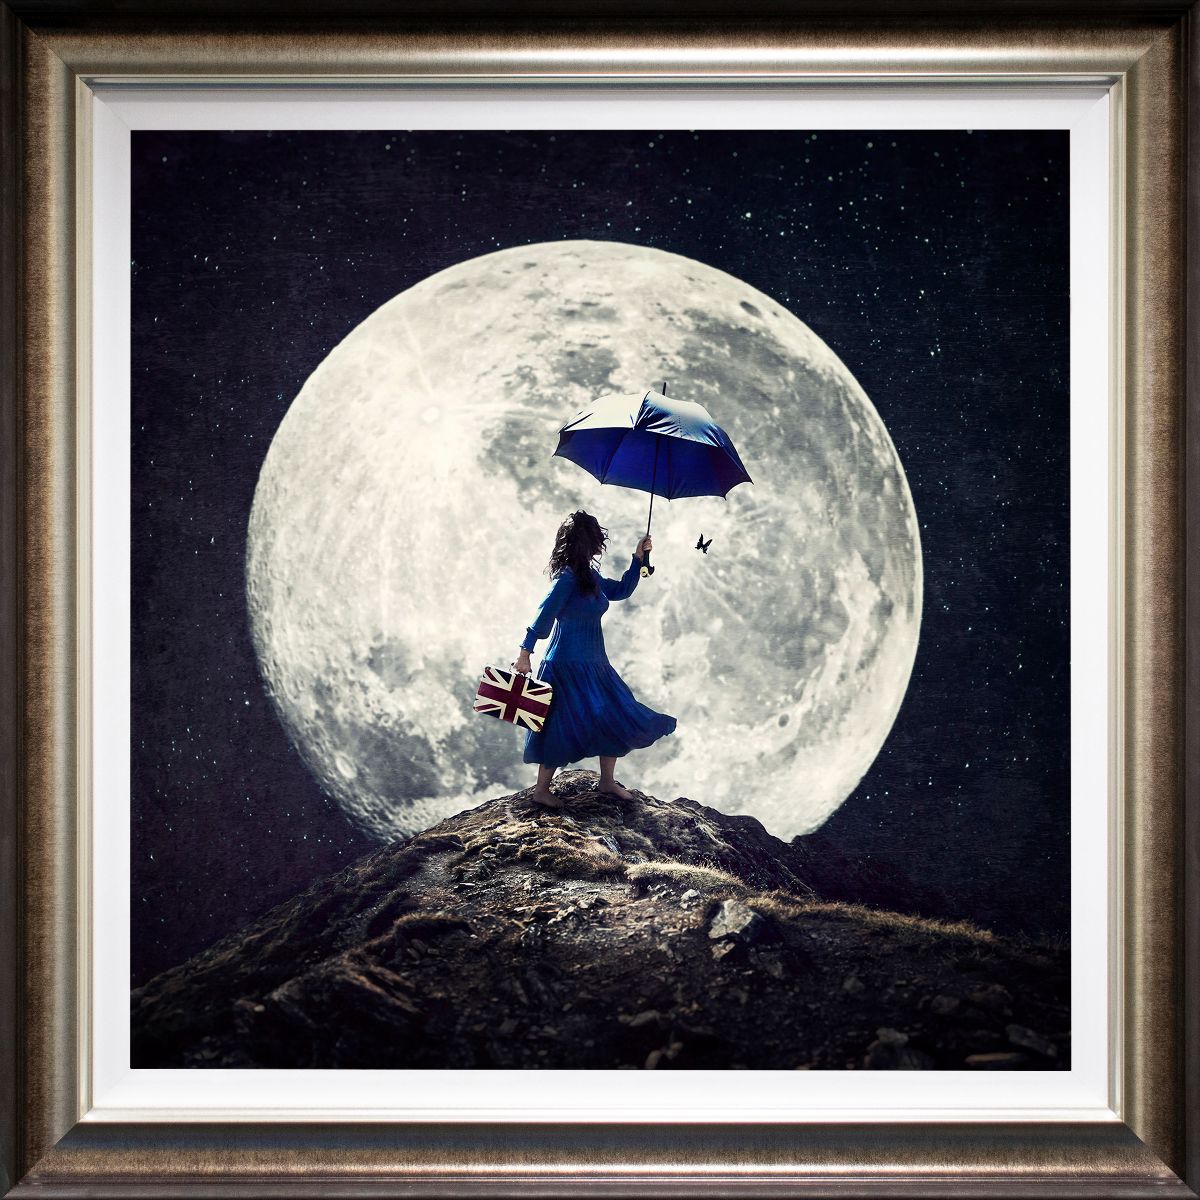 Michelle Mackie - 'I'll Stay Until The Wind Changes' - Framed Limited Edition Art